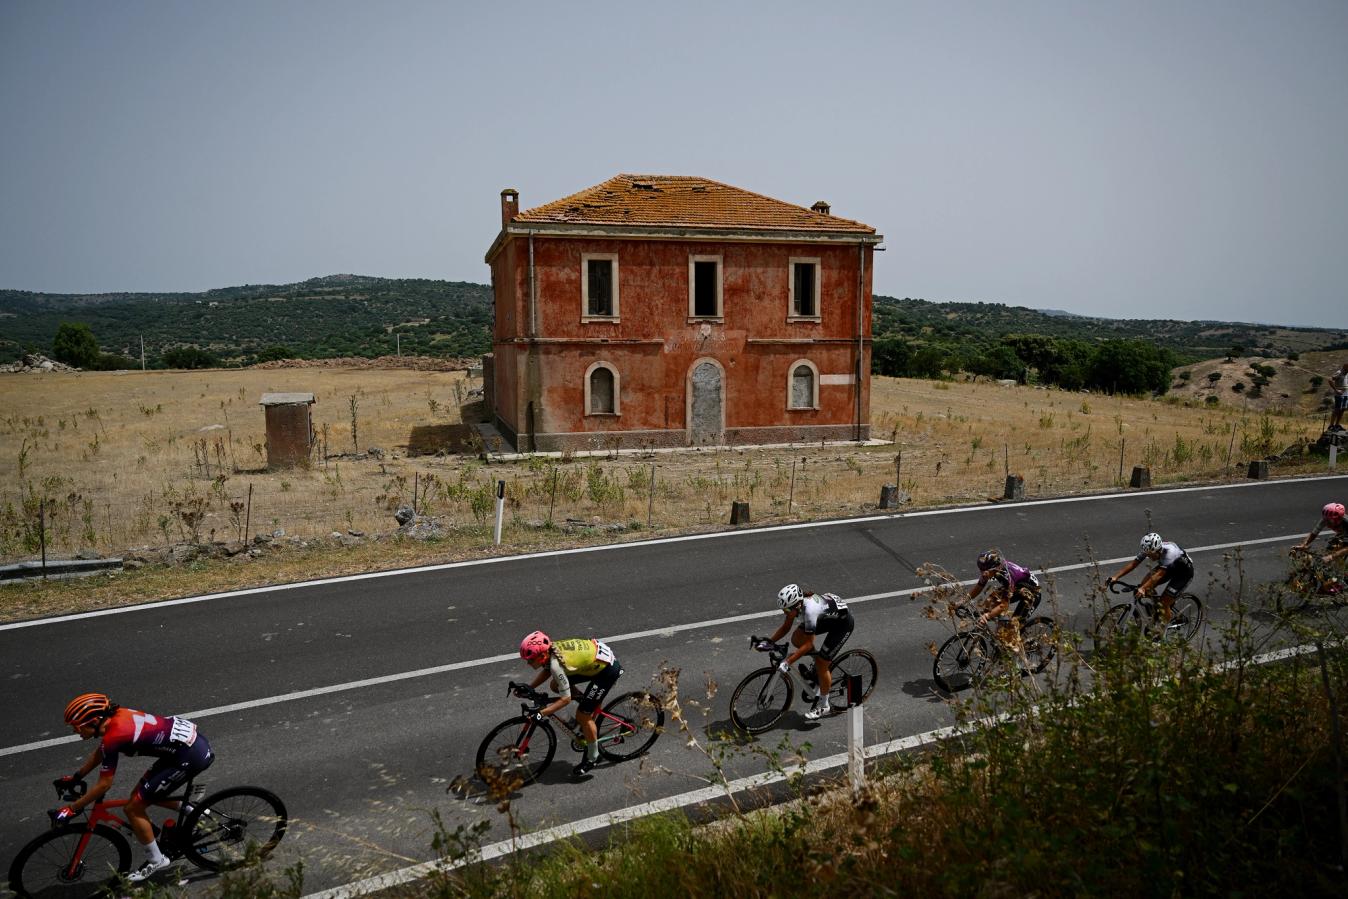 Leaving the pitfalls of its past behind in 2024, the Giro d'Italia Women should be an enriched event for fans at home and abroad to enjoy in equal measure